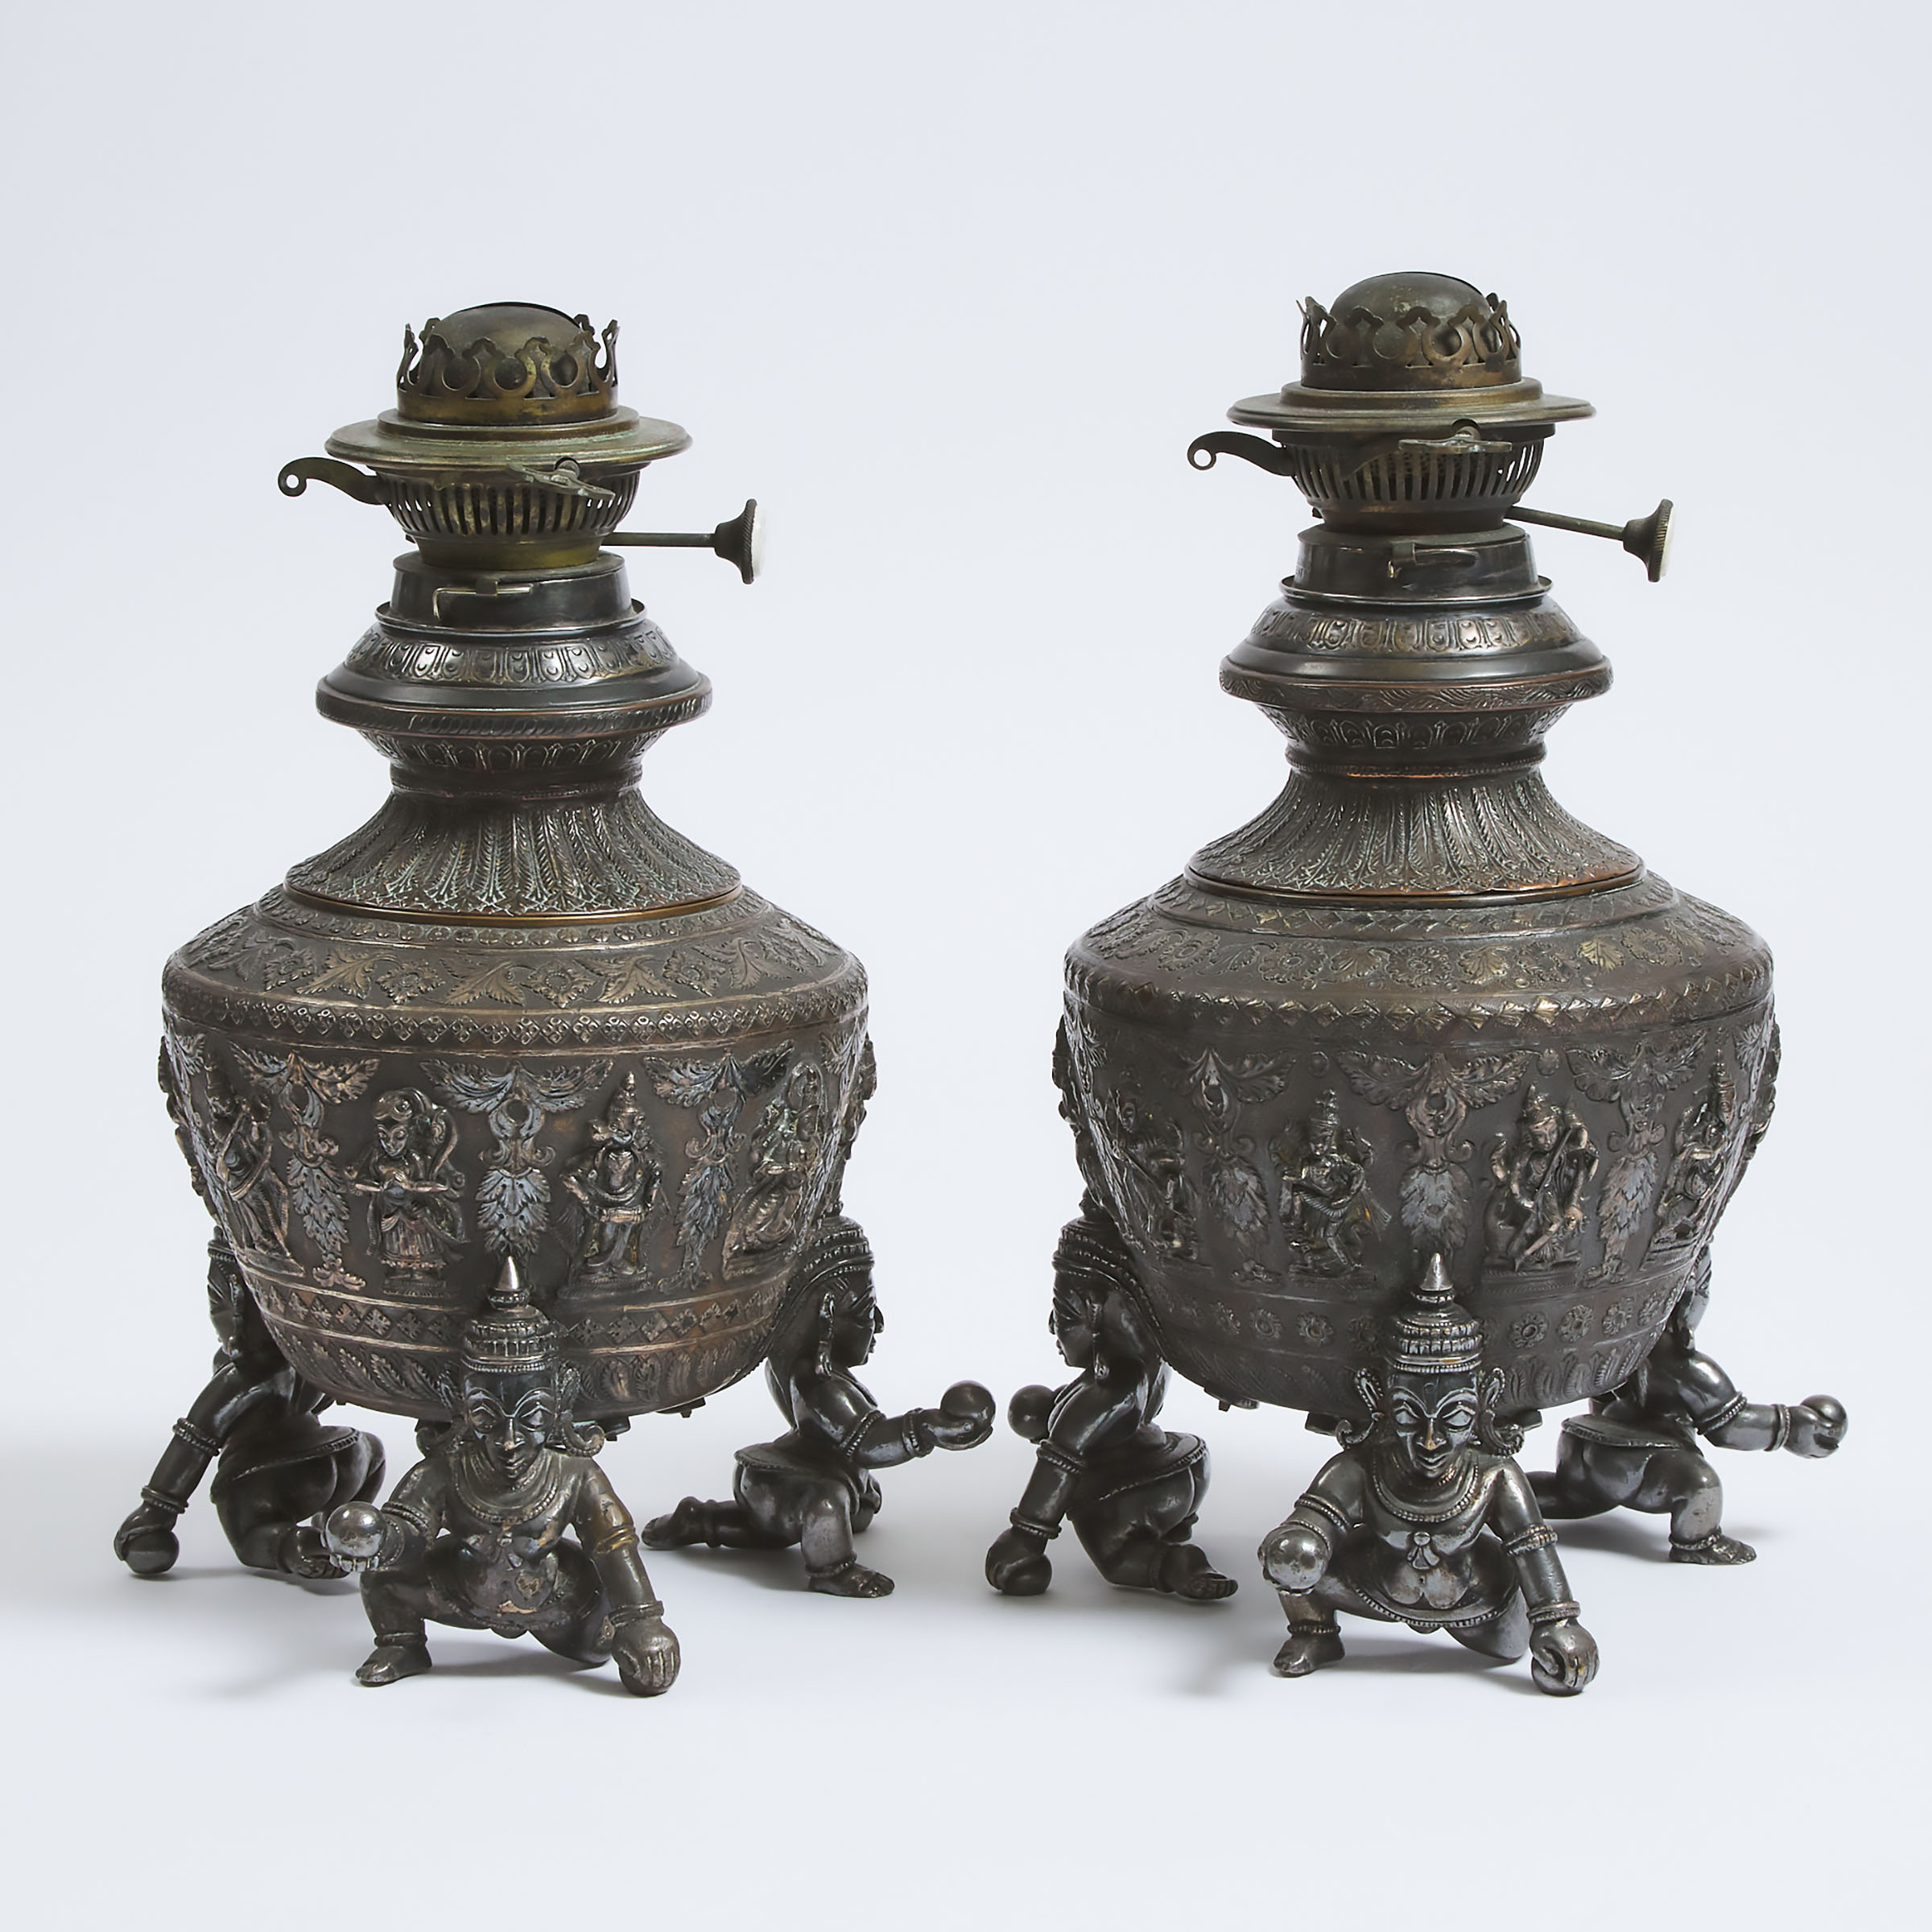 A Pair of Indian Silvered Copper Lamps, 19th/Early 20th Century